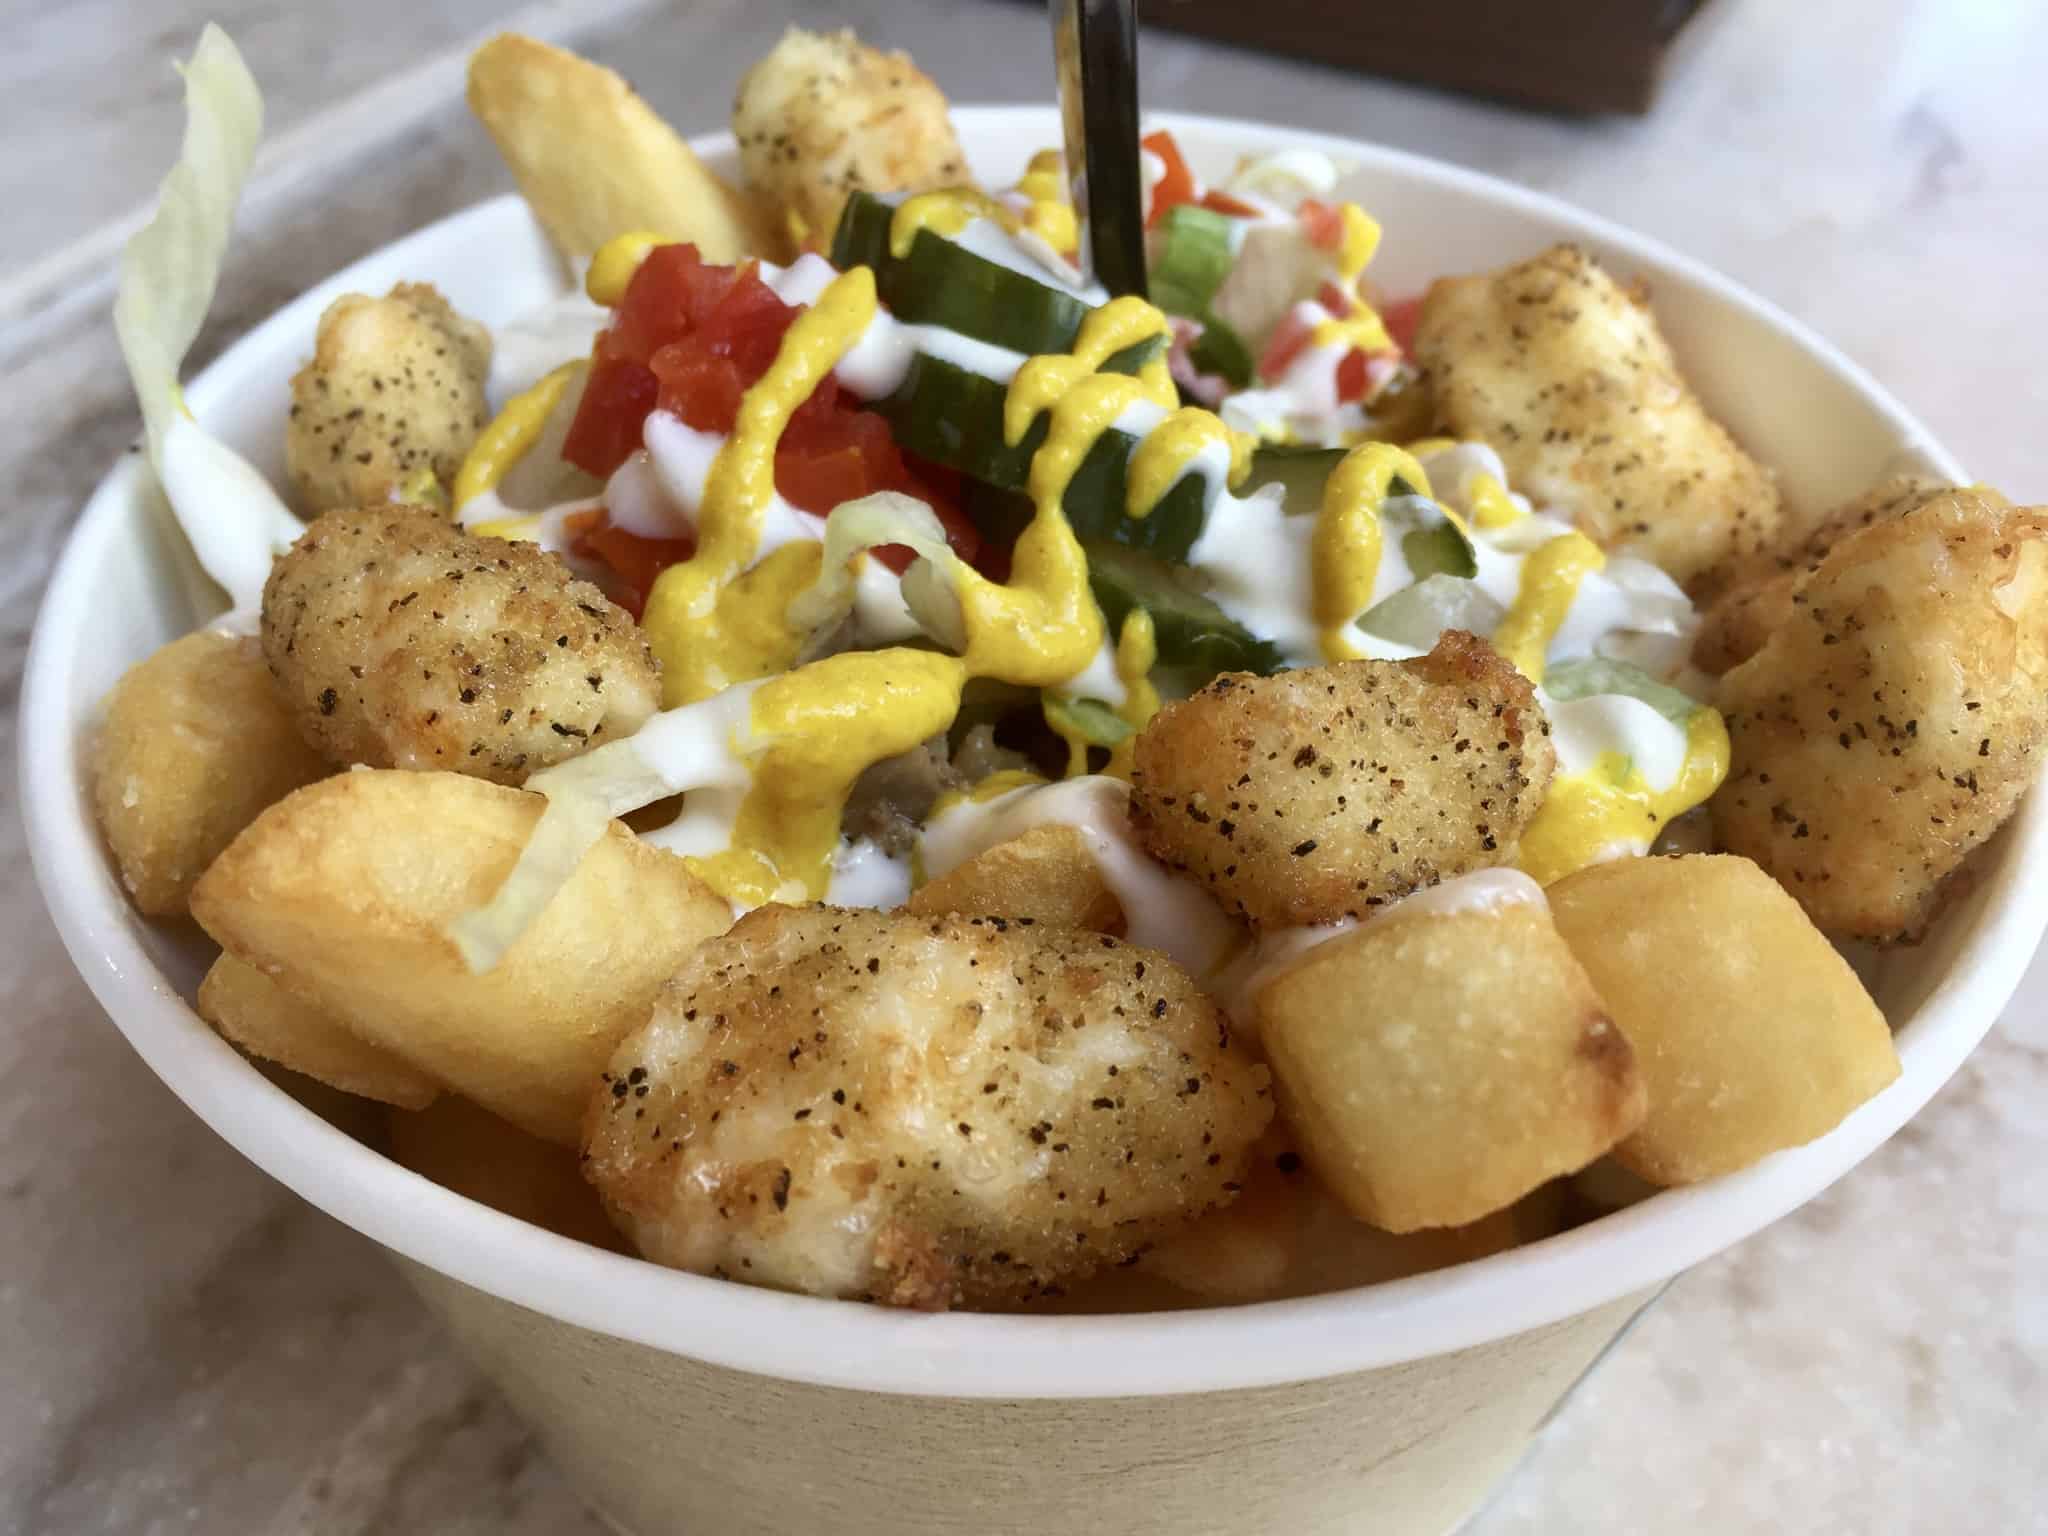 REVIEW: The Daily Poutine Introduces Cheeseburger Poutine